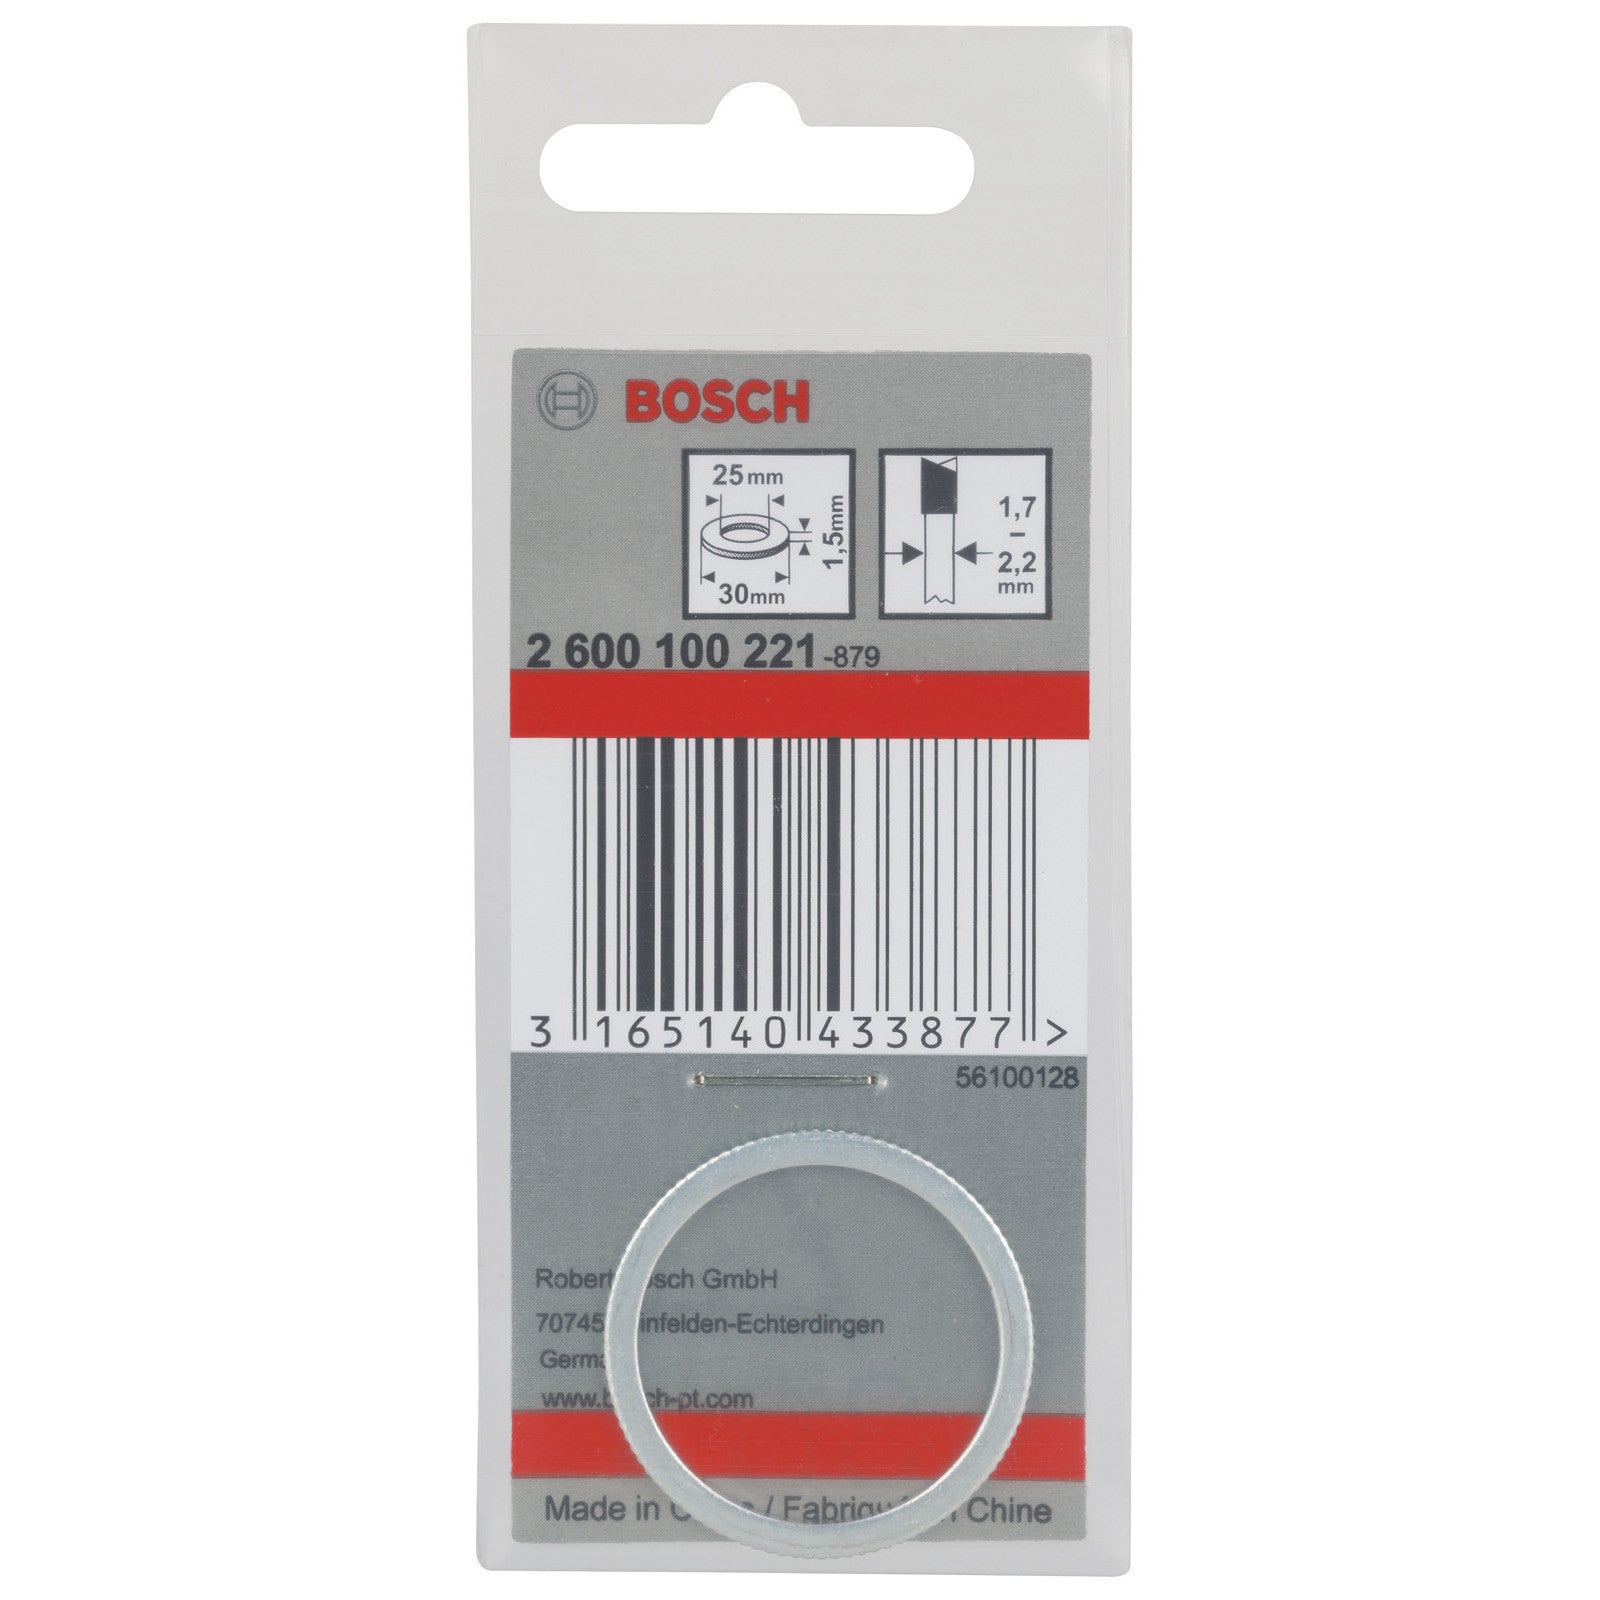 Bosch Reduction ring circular saw blade 30 x 25 x 1.5 mm 2600100221 Power Tool Services